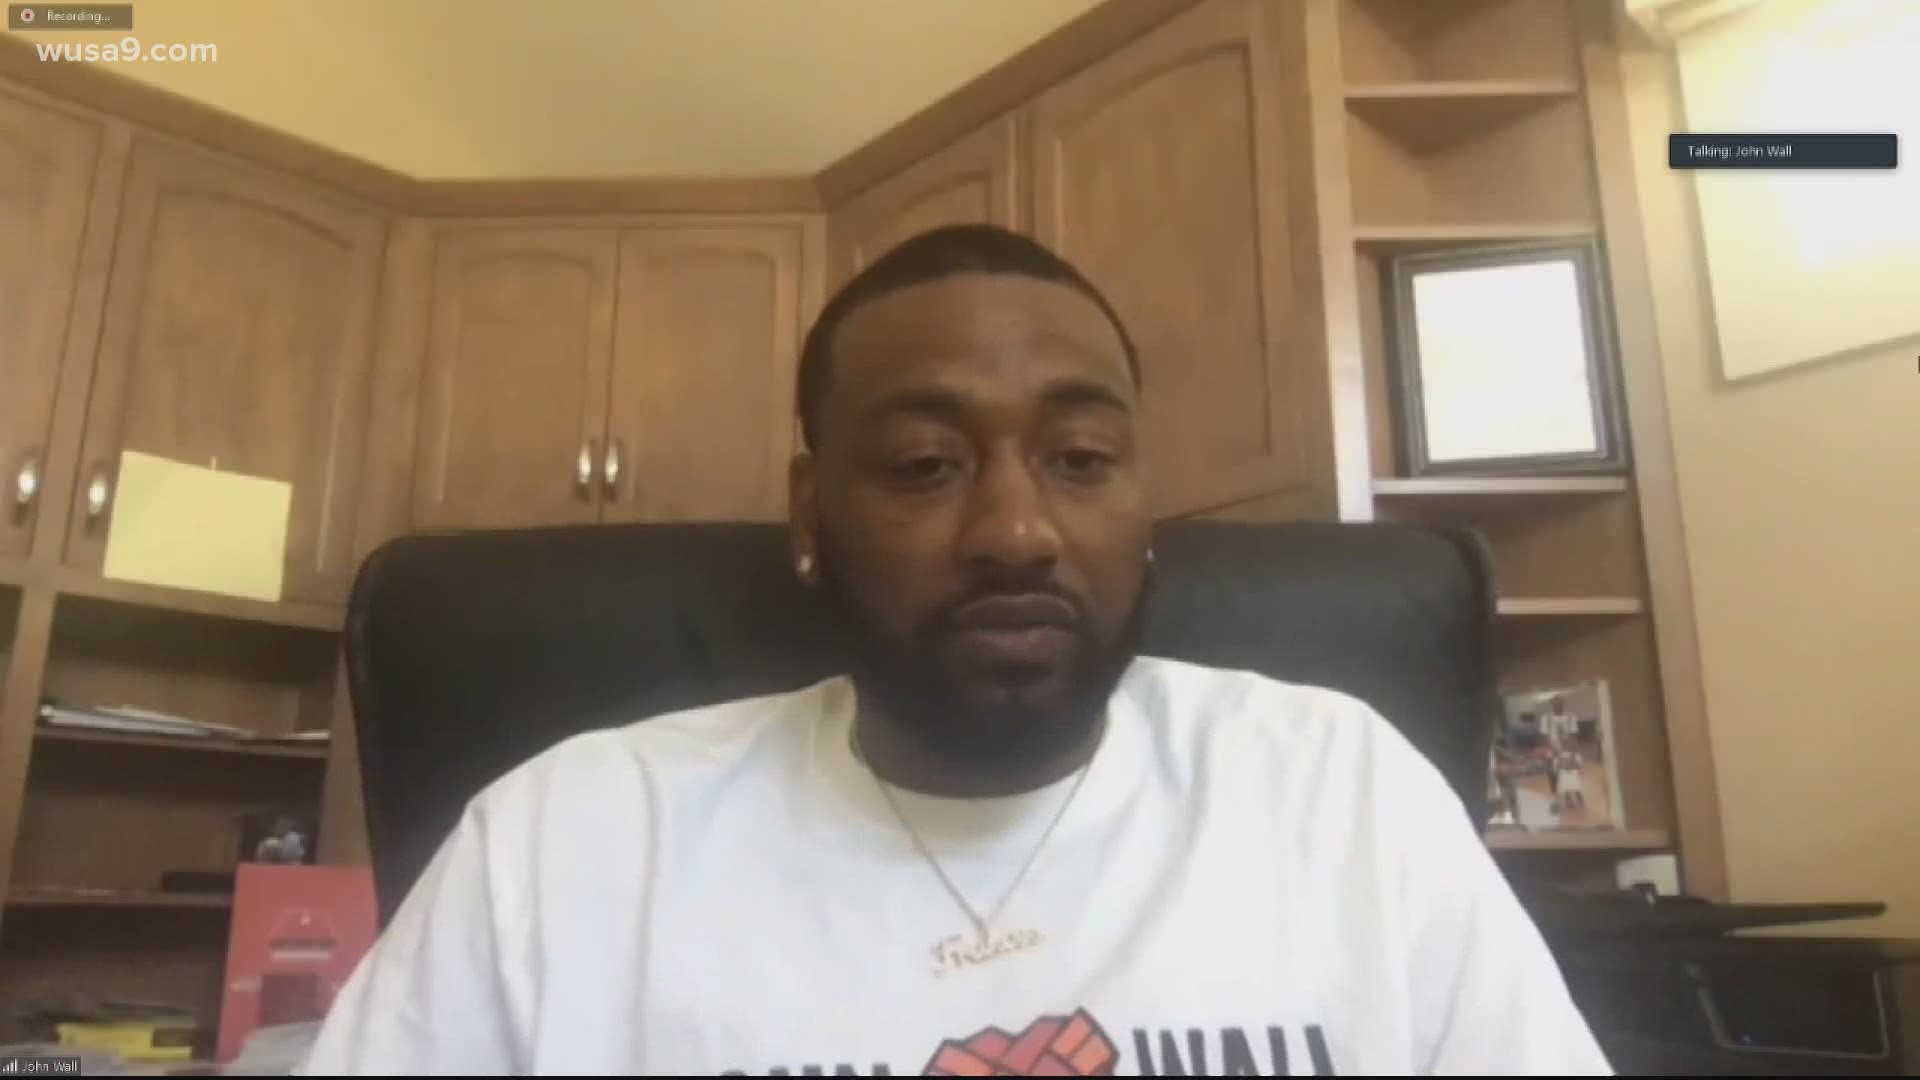 A new rent assistance program set up by Washington Wizards star John Wall is helping those in Ward 8, one of the District's most underserved communities.